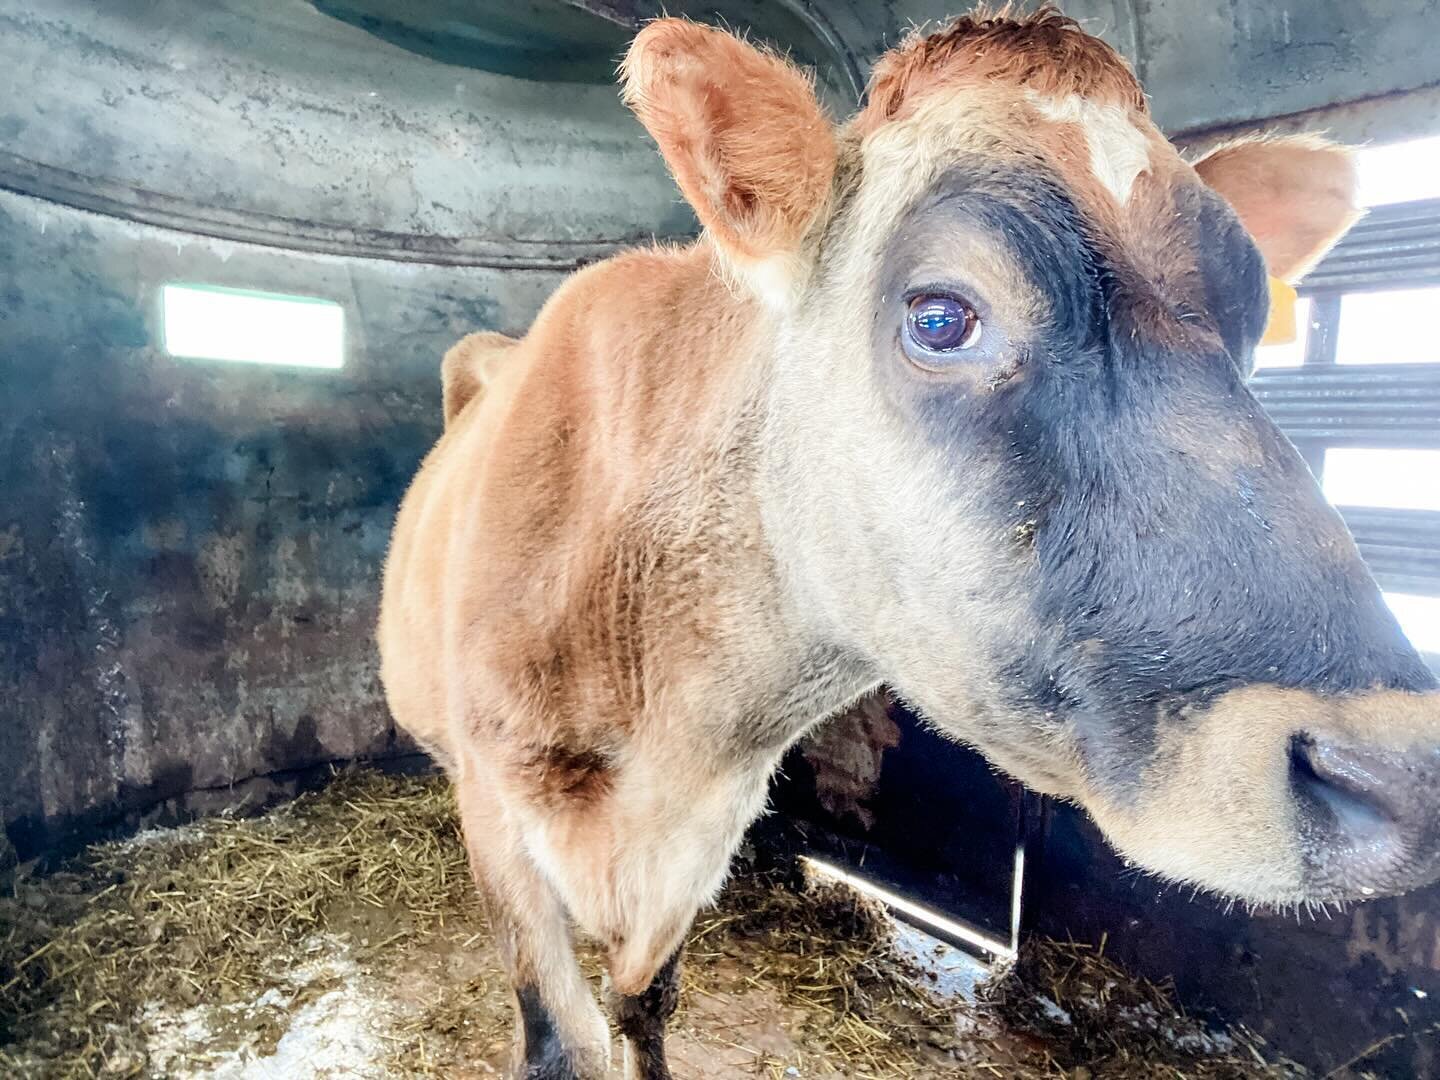 This week was the end of an era 😭
&hellip;
We finally retired Peggy Sue, the 3rd cow we ever purchased on a snowy Super Bowl Sunday. 🤯
&hellip;
She has served our herd well, having 11 calves in her 13 years with high milk production for long lactat